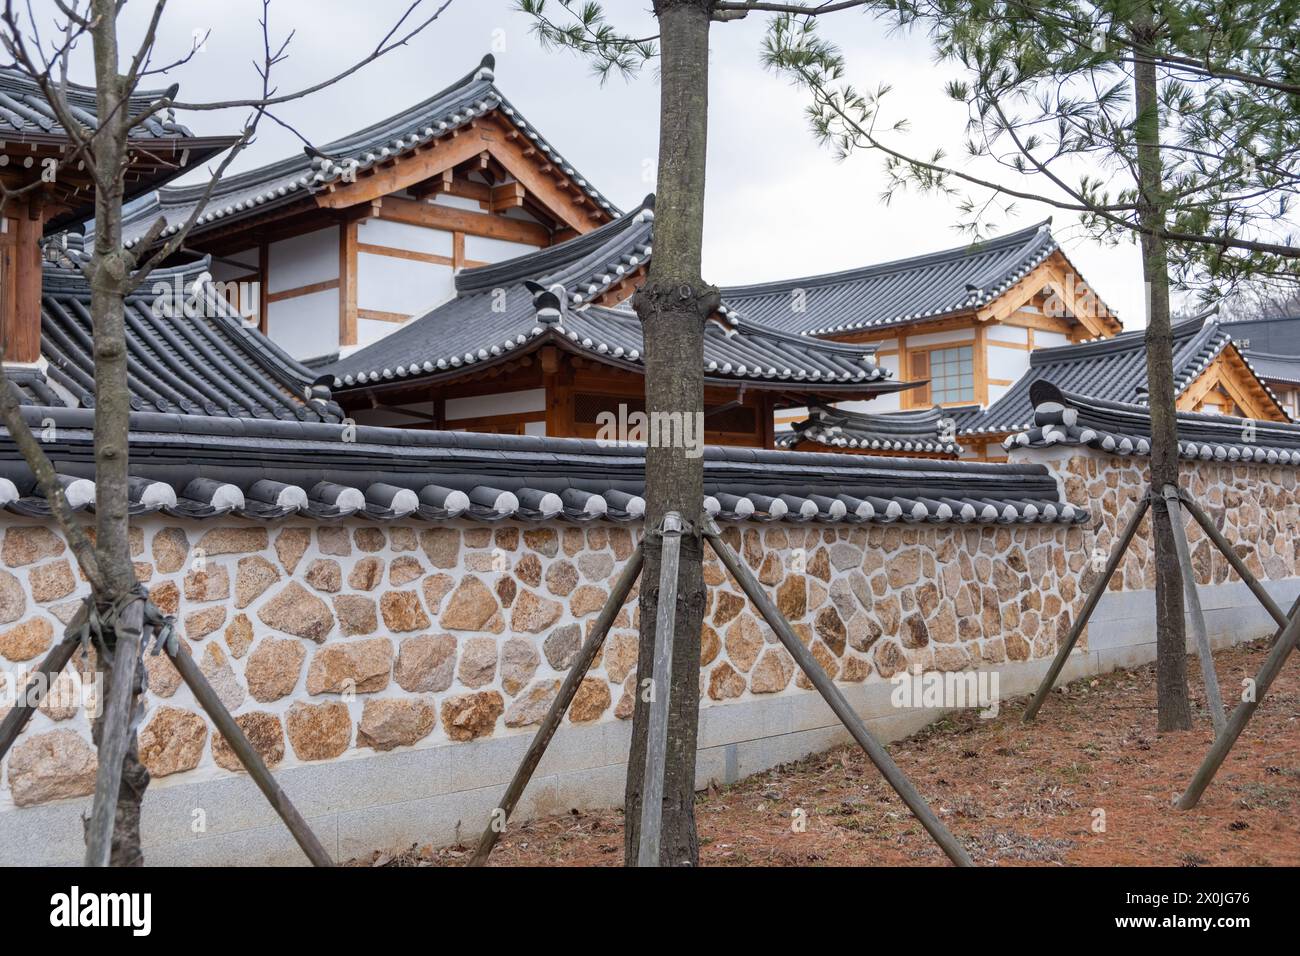 Eunpyeong Hanok Village, the largest neo-hanok residential complex in the capital area which surrounded by hills and mountains in Seoul, South Korea Stock Photo